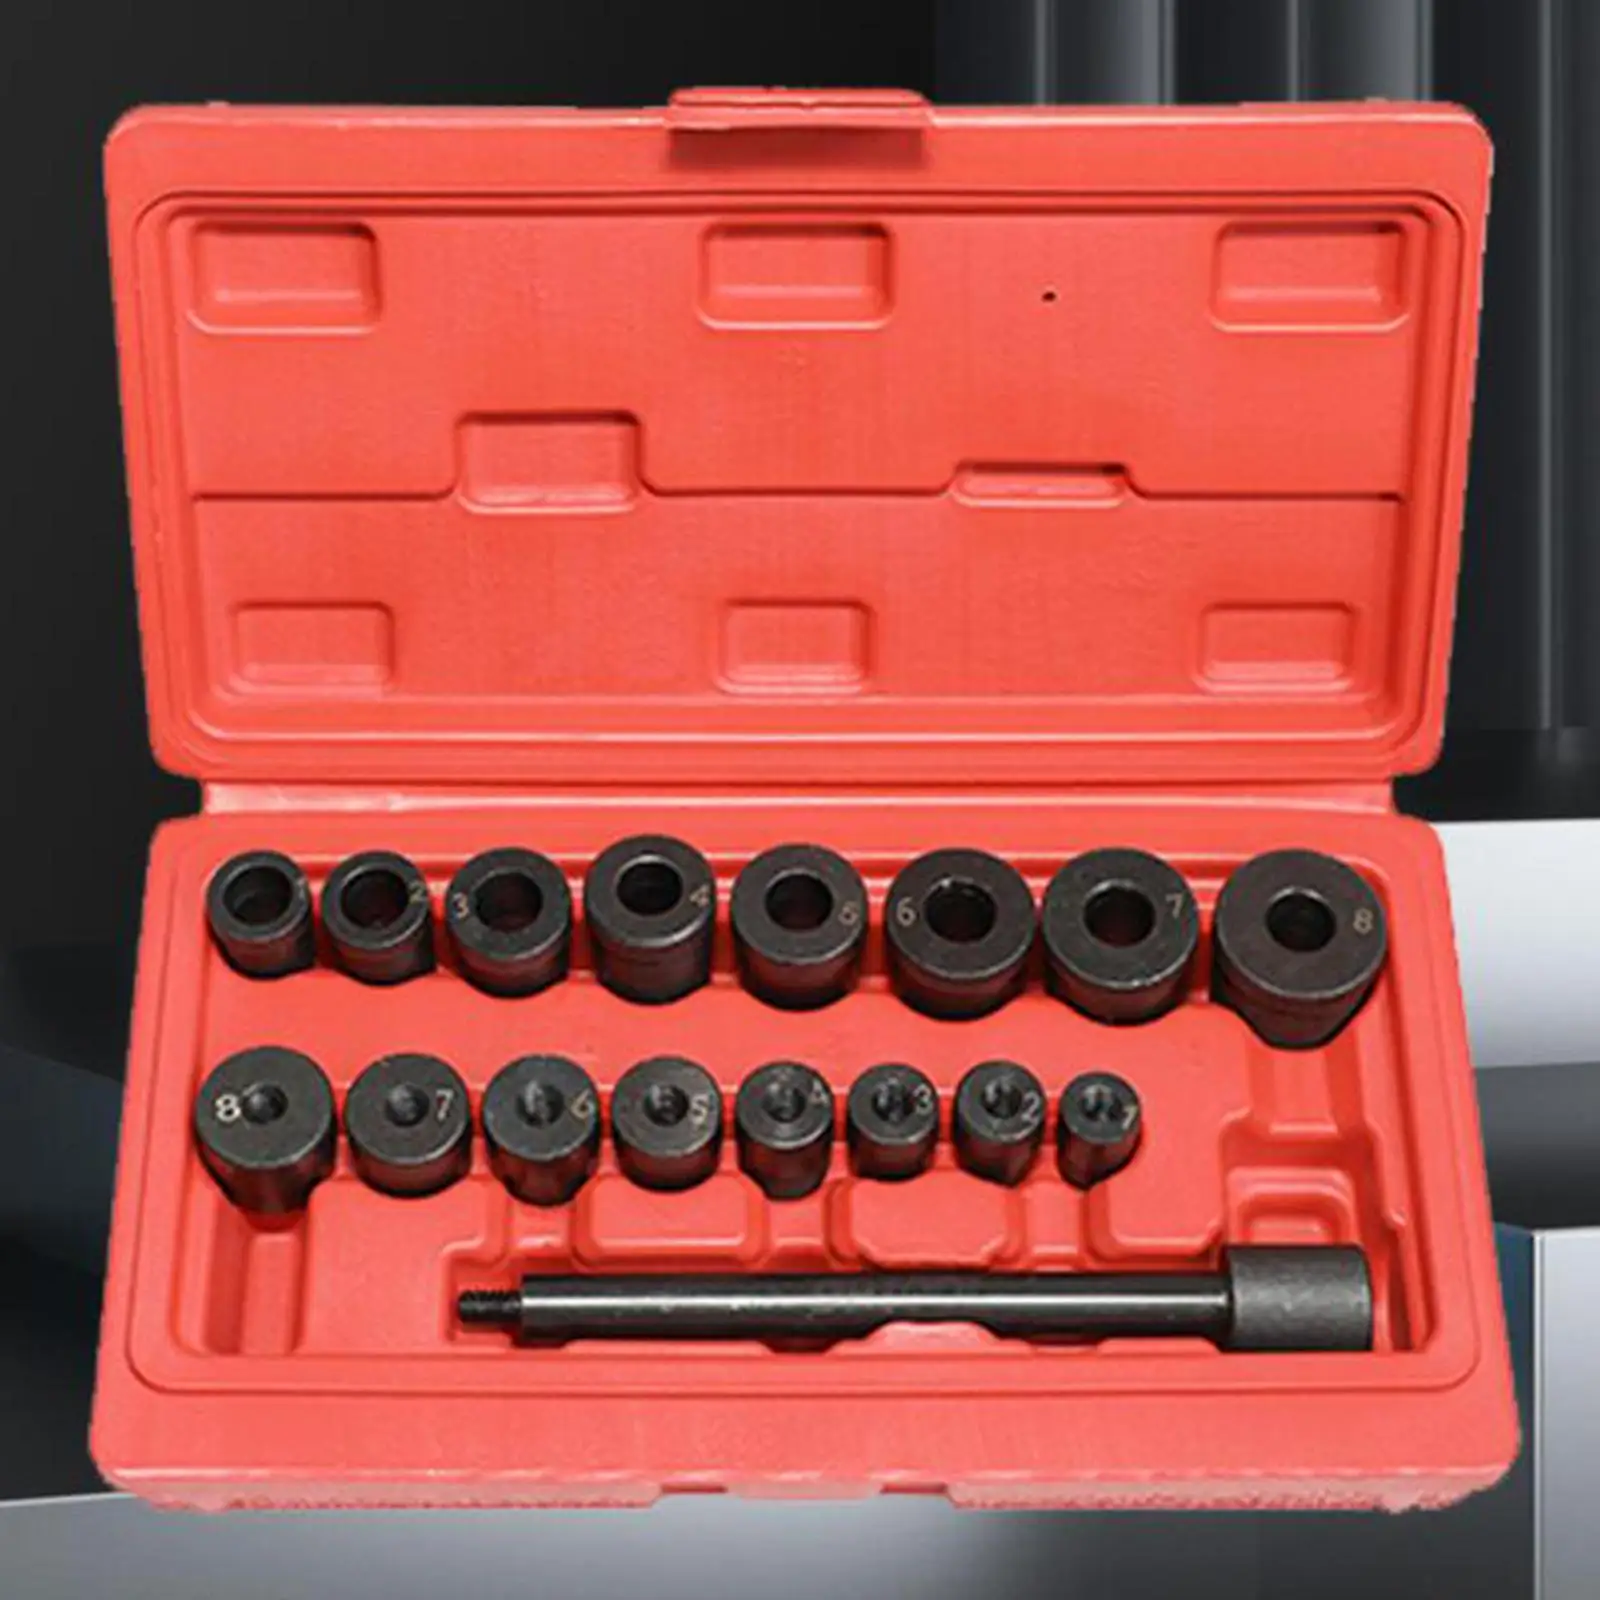 17x Clutch Aligning Kit Repair Clutch Drive Plate Aligning Tool for Truck